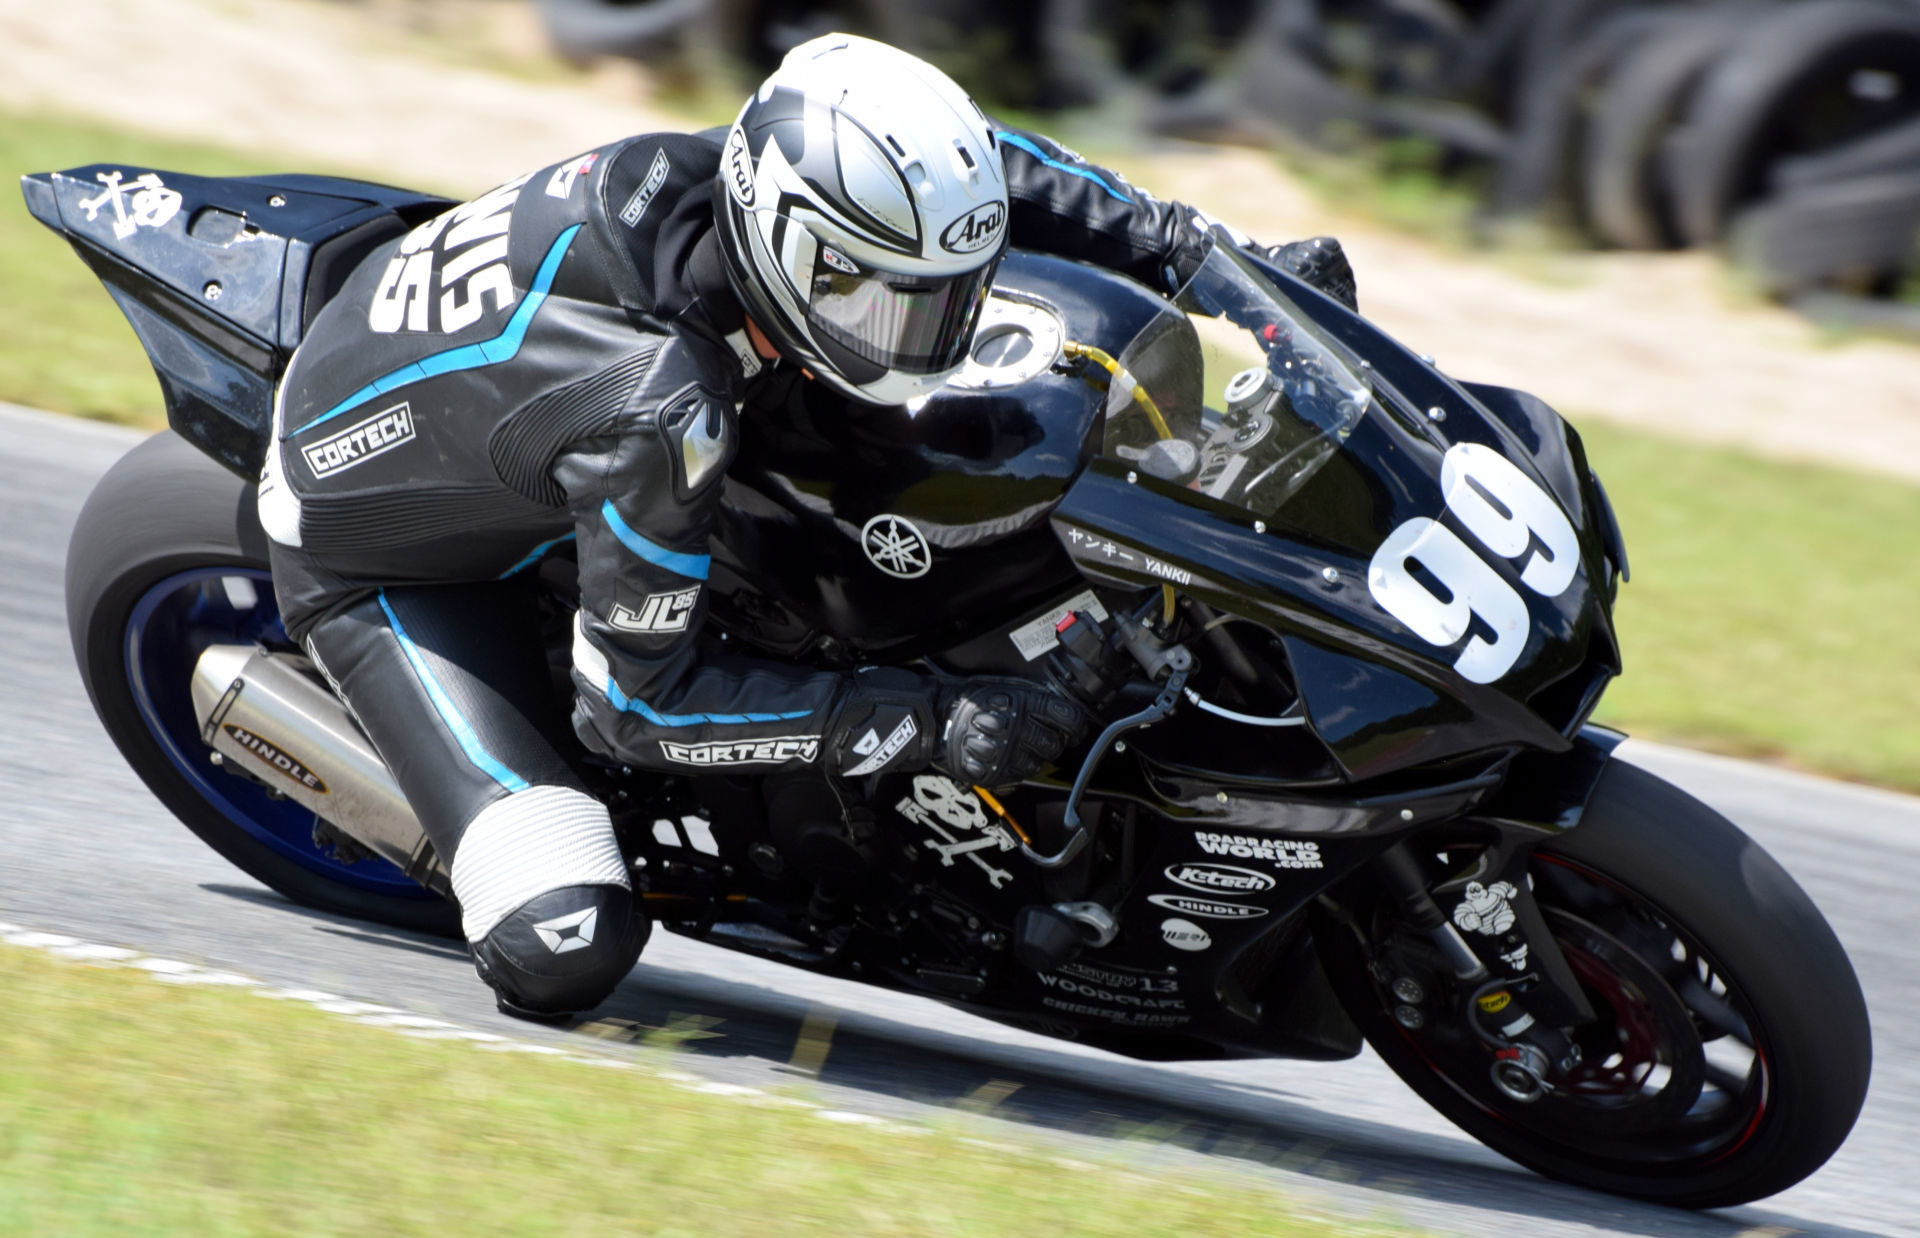 Jake Lewis (99) on the Army of Darkness Yamaha YZF-R1 at Roebling Road Raceway. Photo by Rick Hentz.